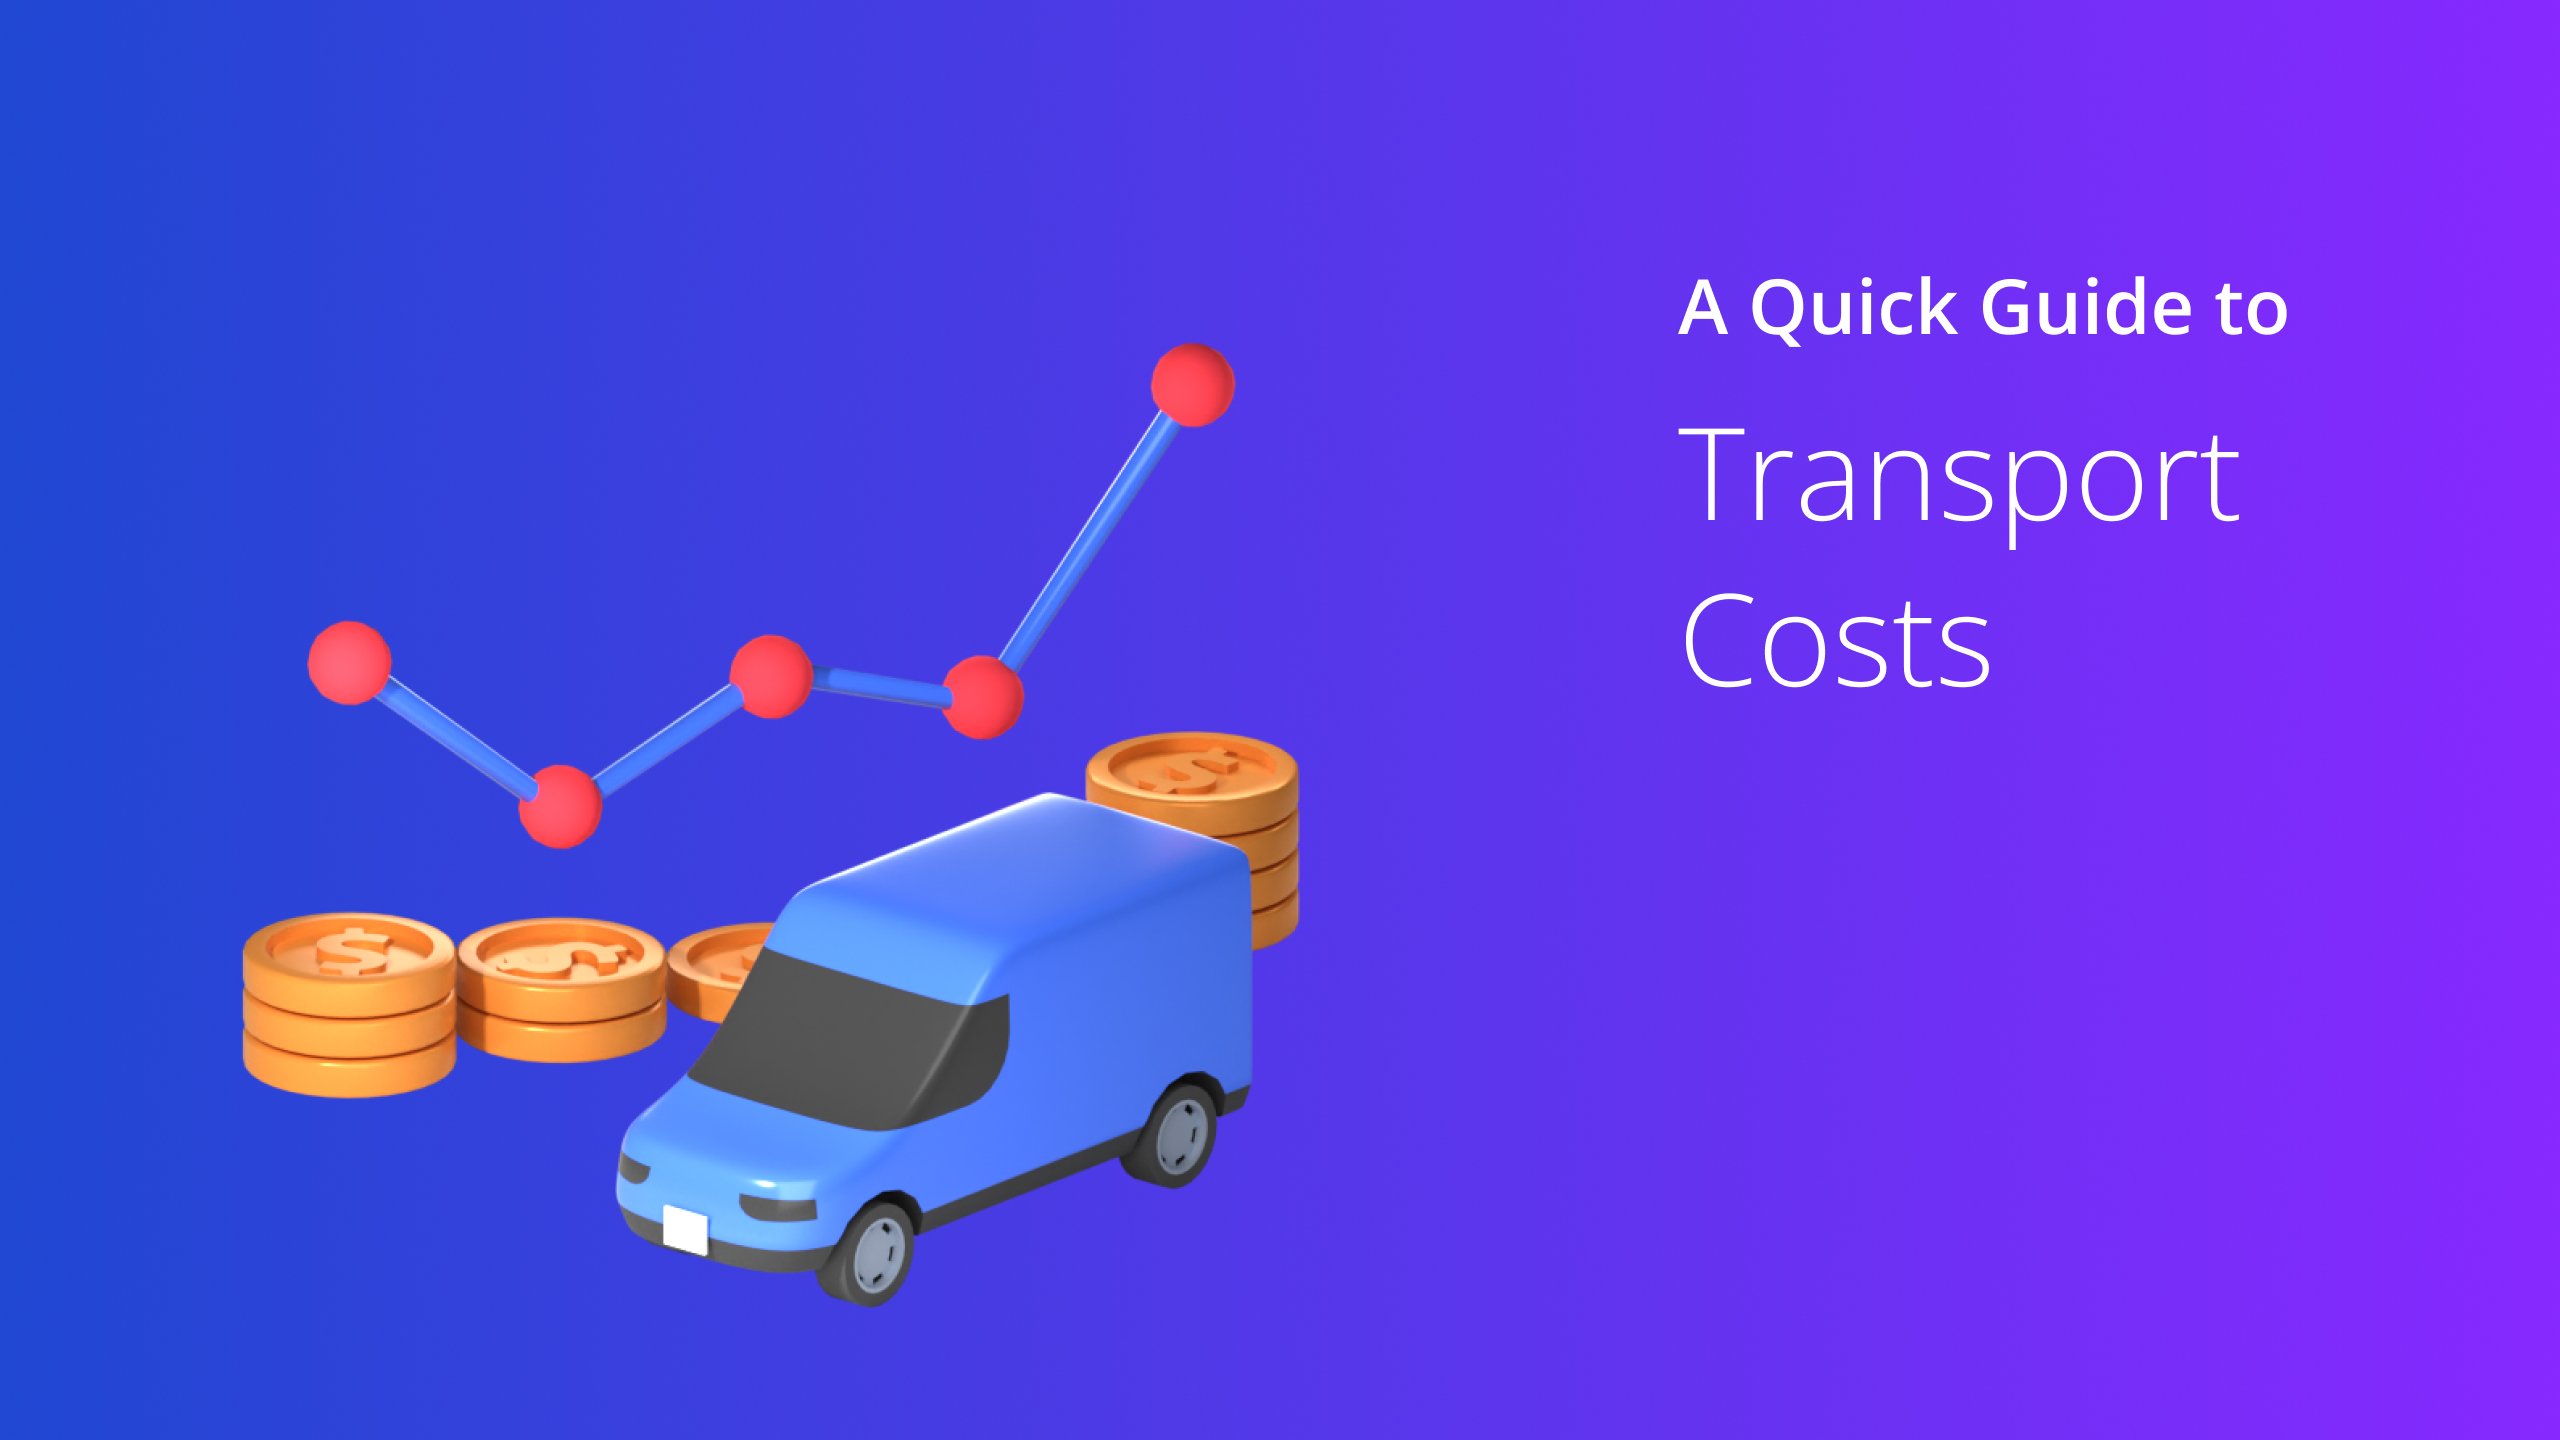 Custom Image - A Quick Guide to Transport Costs